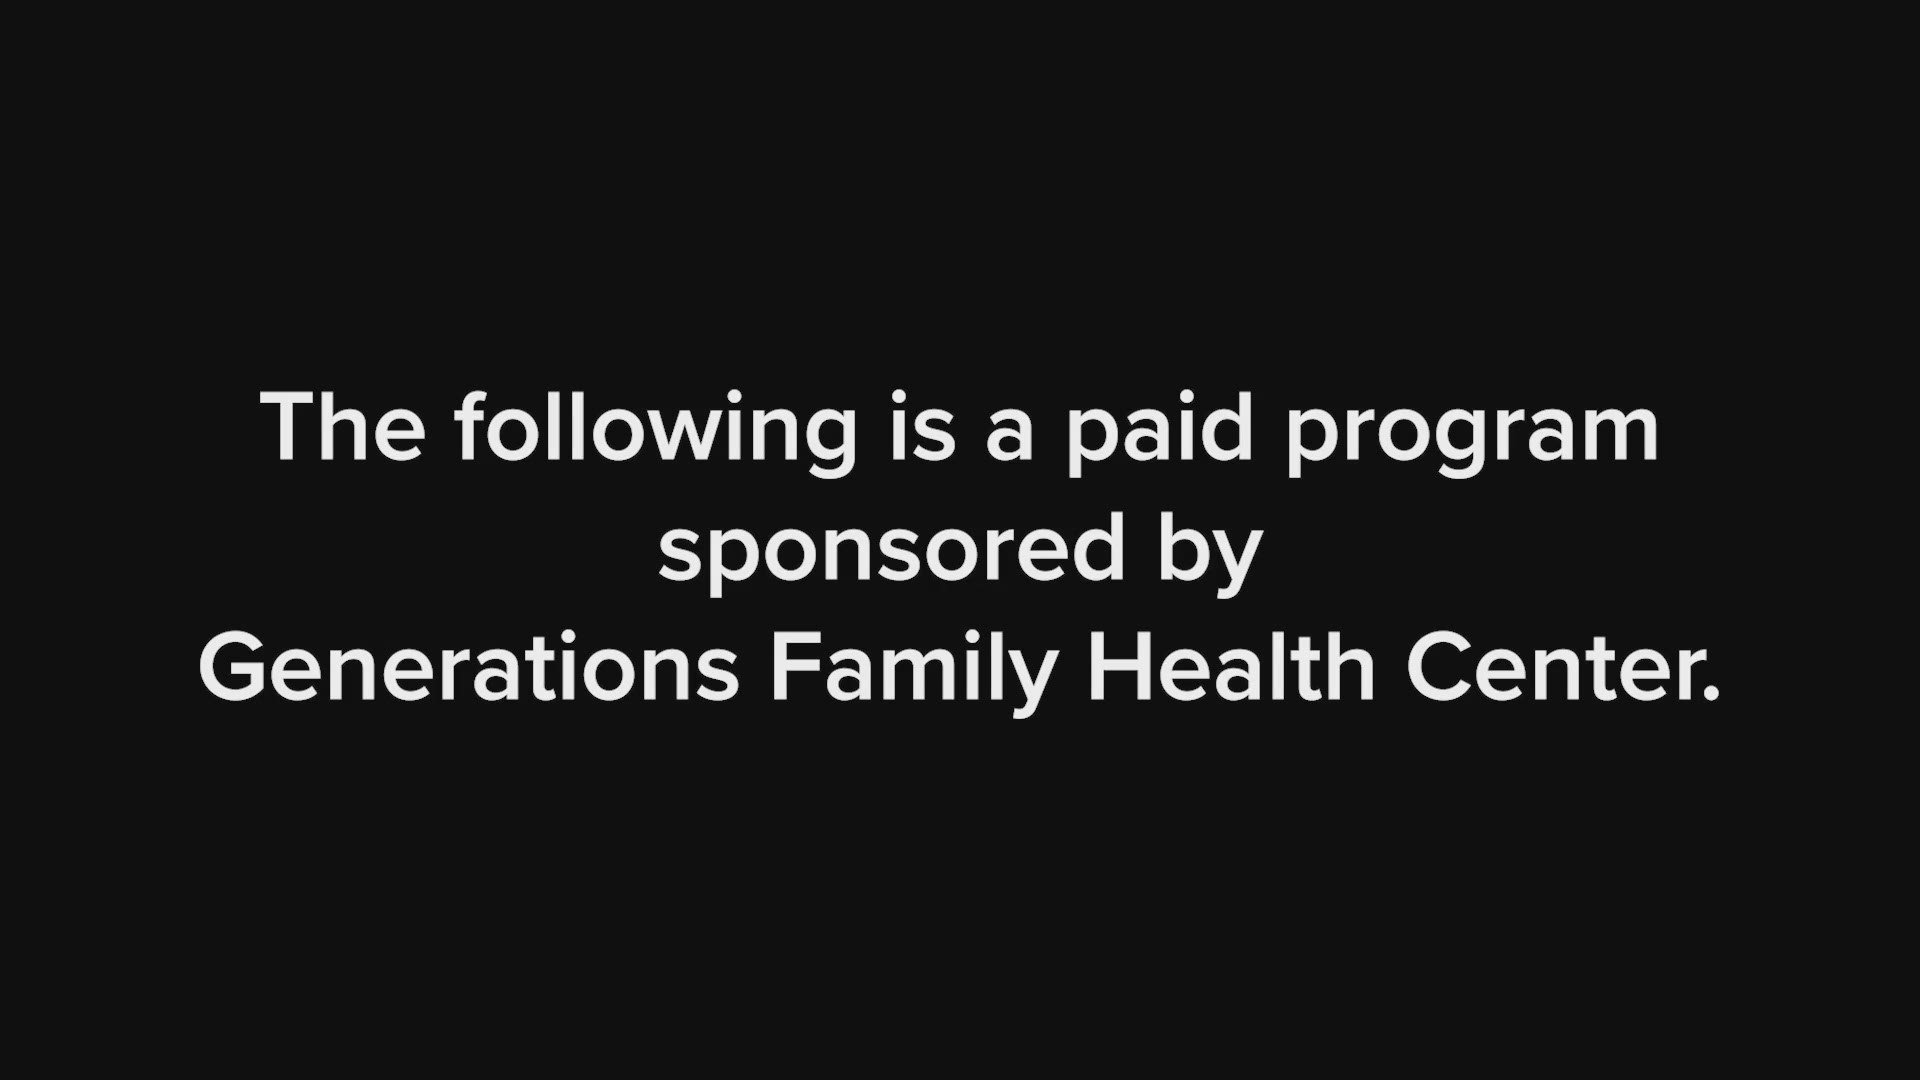 Learn about the services Generations Family Health Center offers